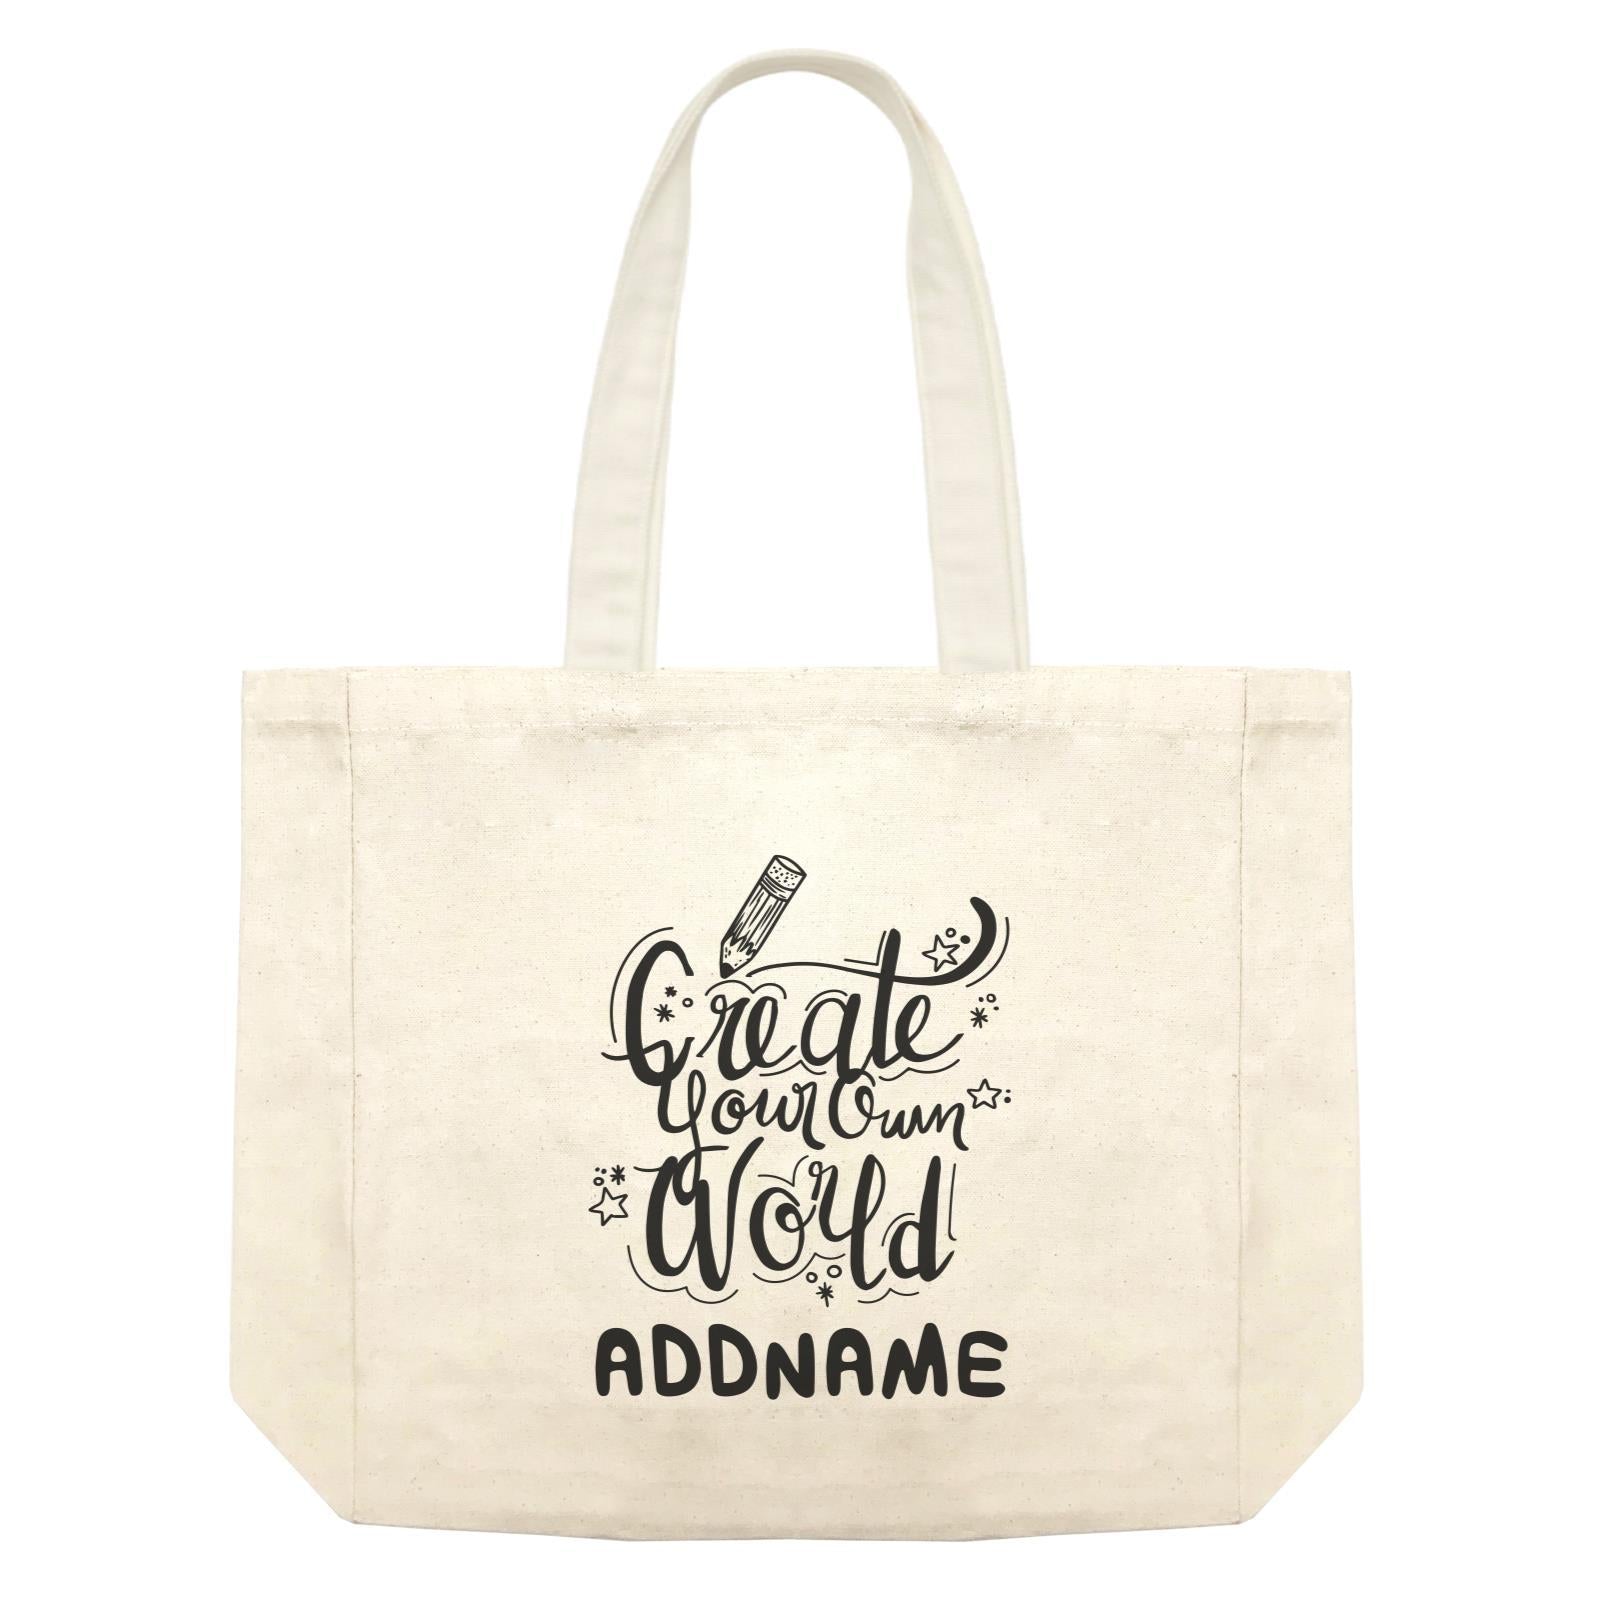 Children's Day Gift Series Create Your Own World Addname Shopping Bag